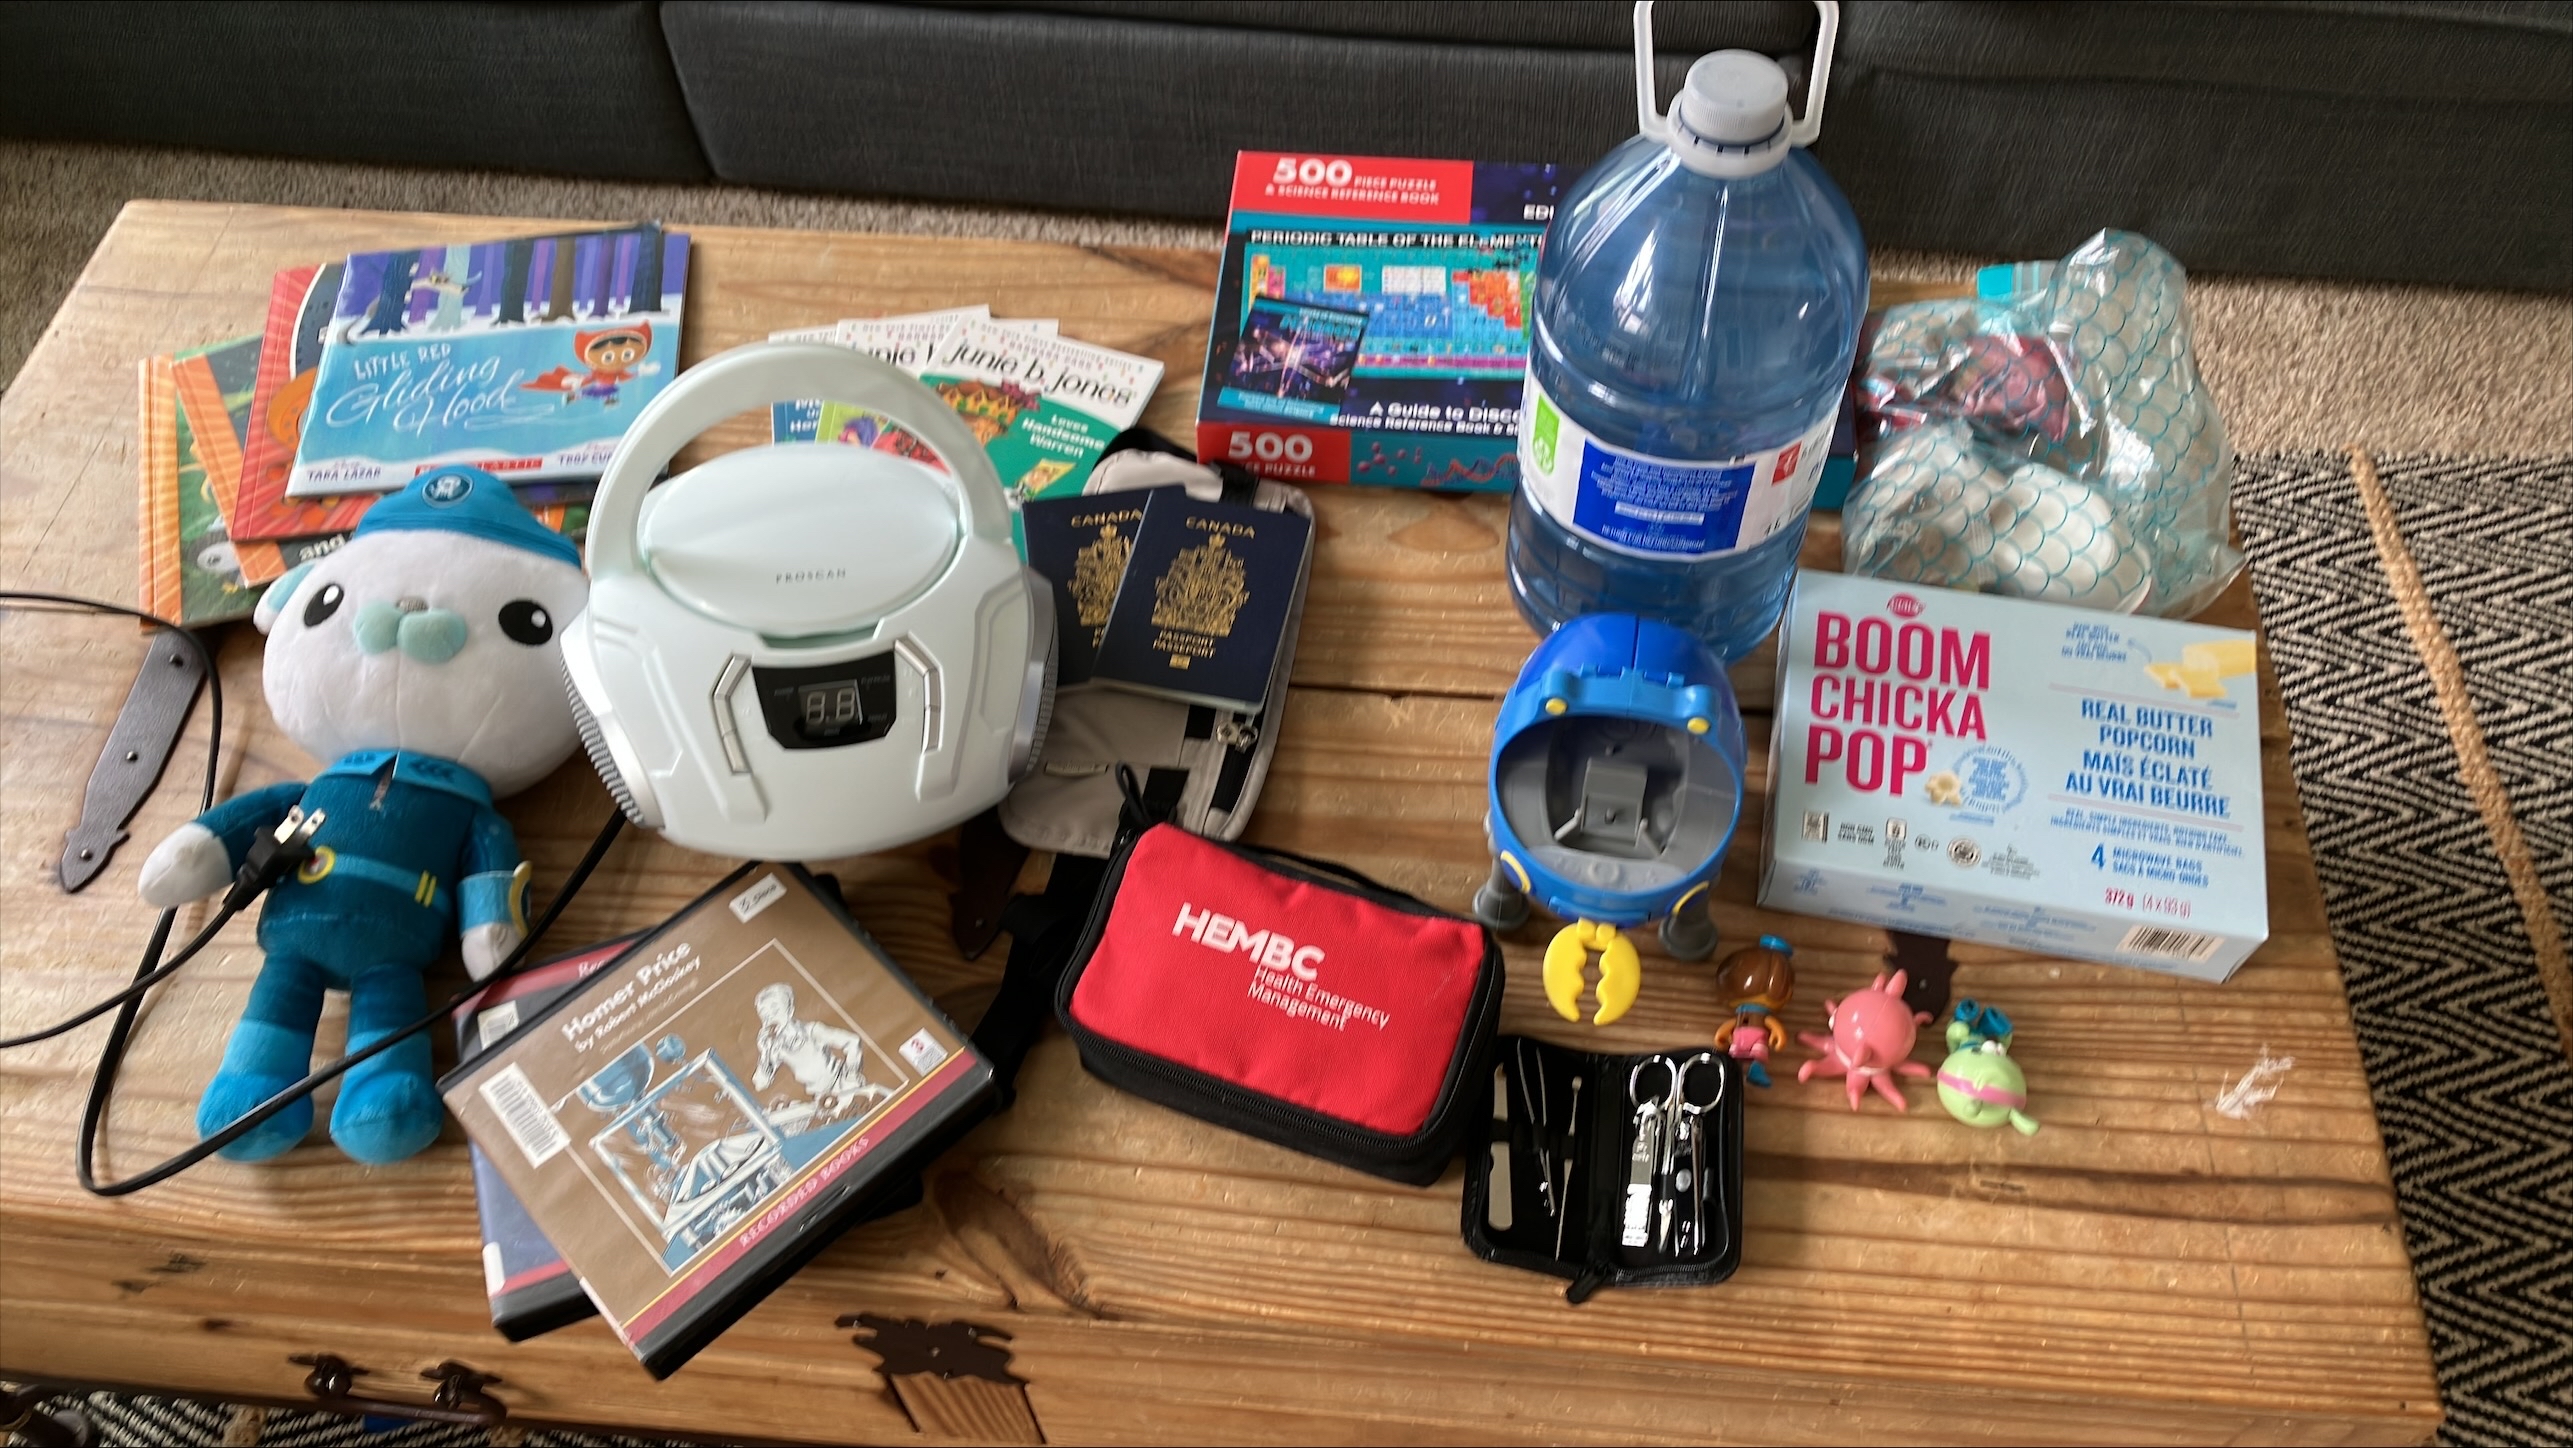 Soft toy, children’s books, small white radio, passports, bottle of water, and other items lying on a table